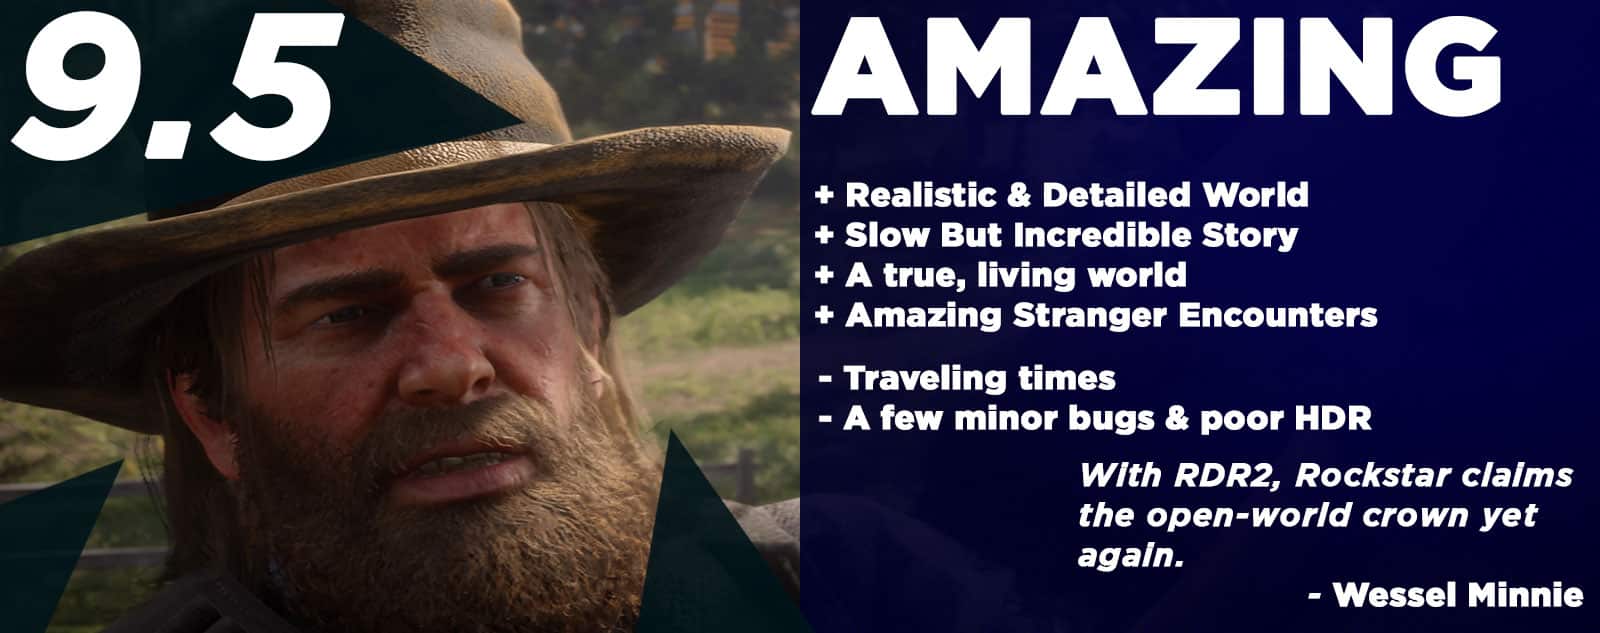 RDR2 Review Summary